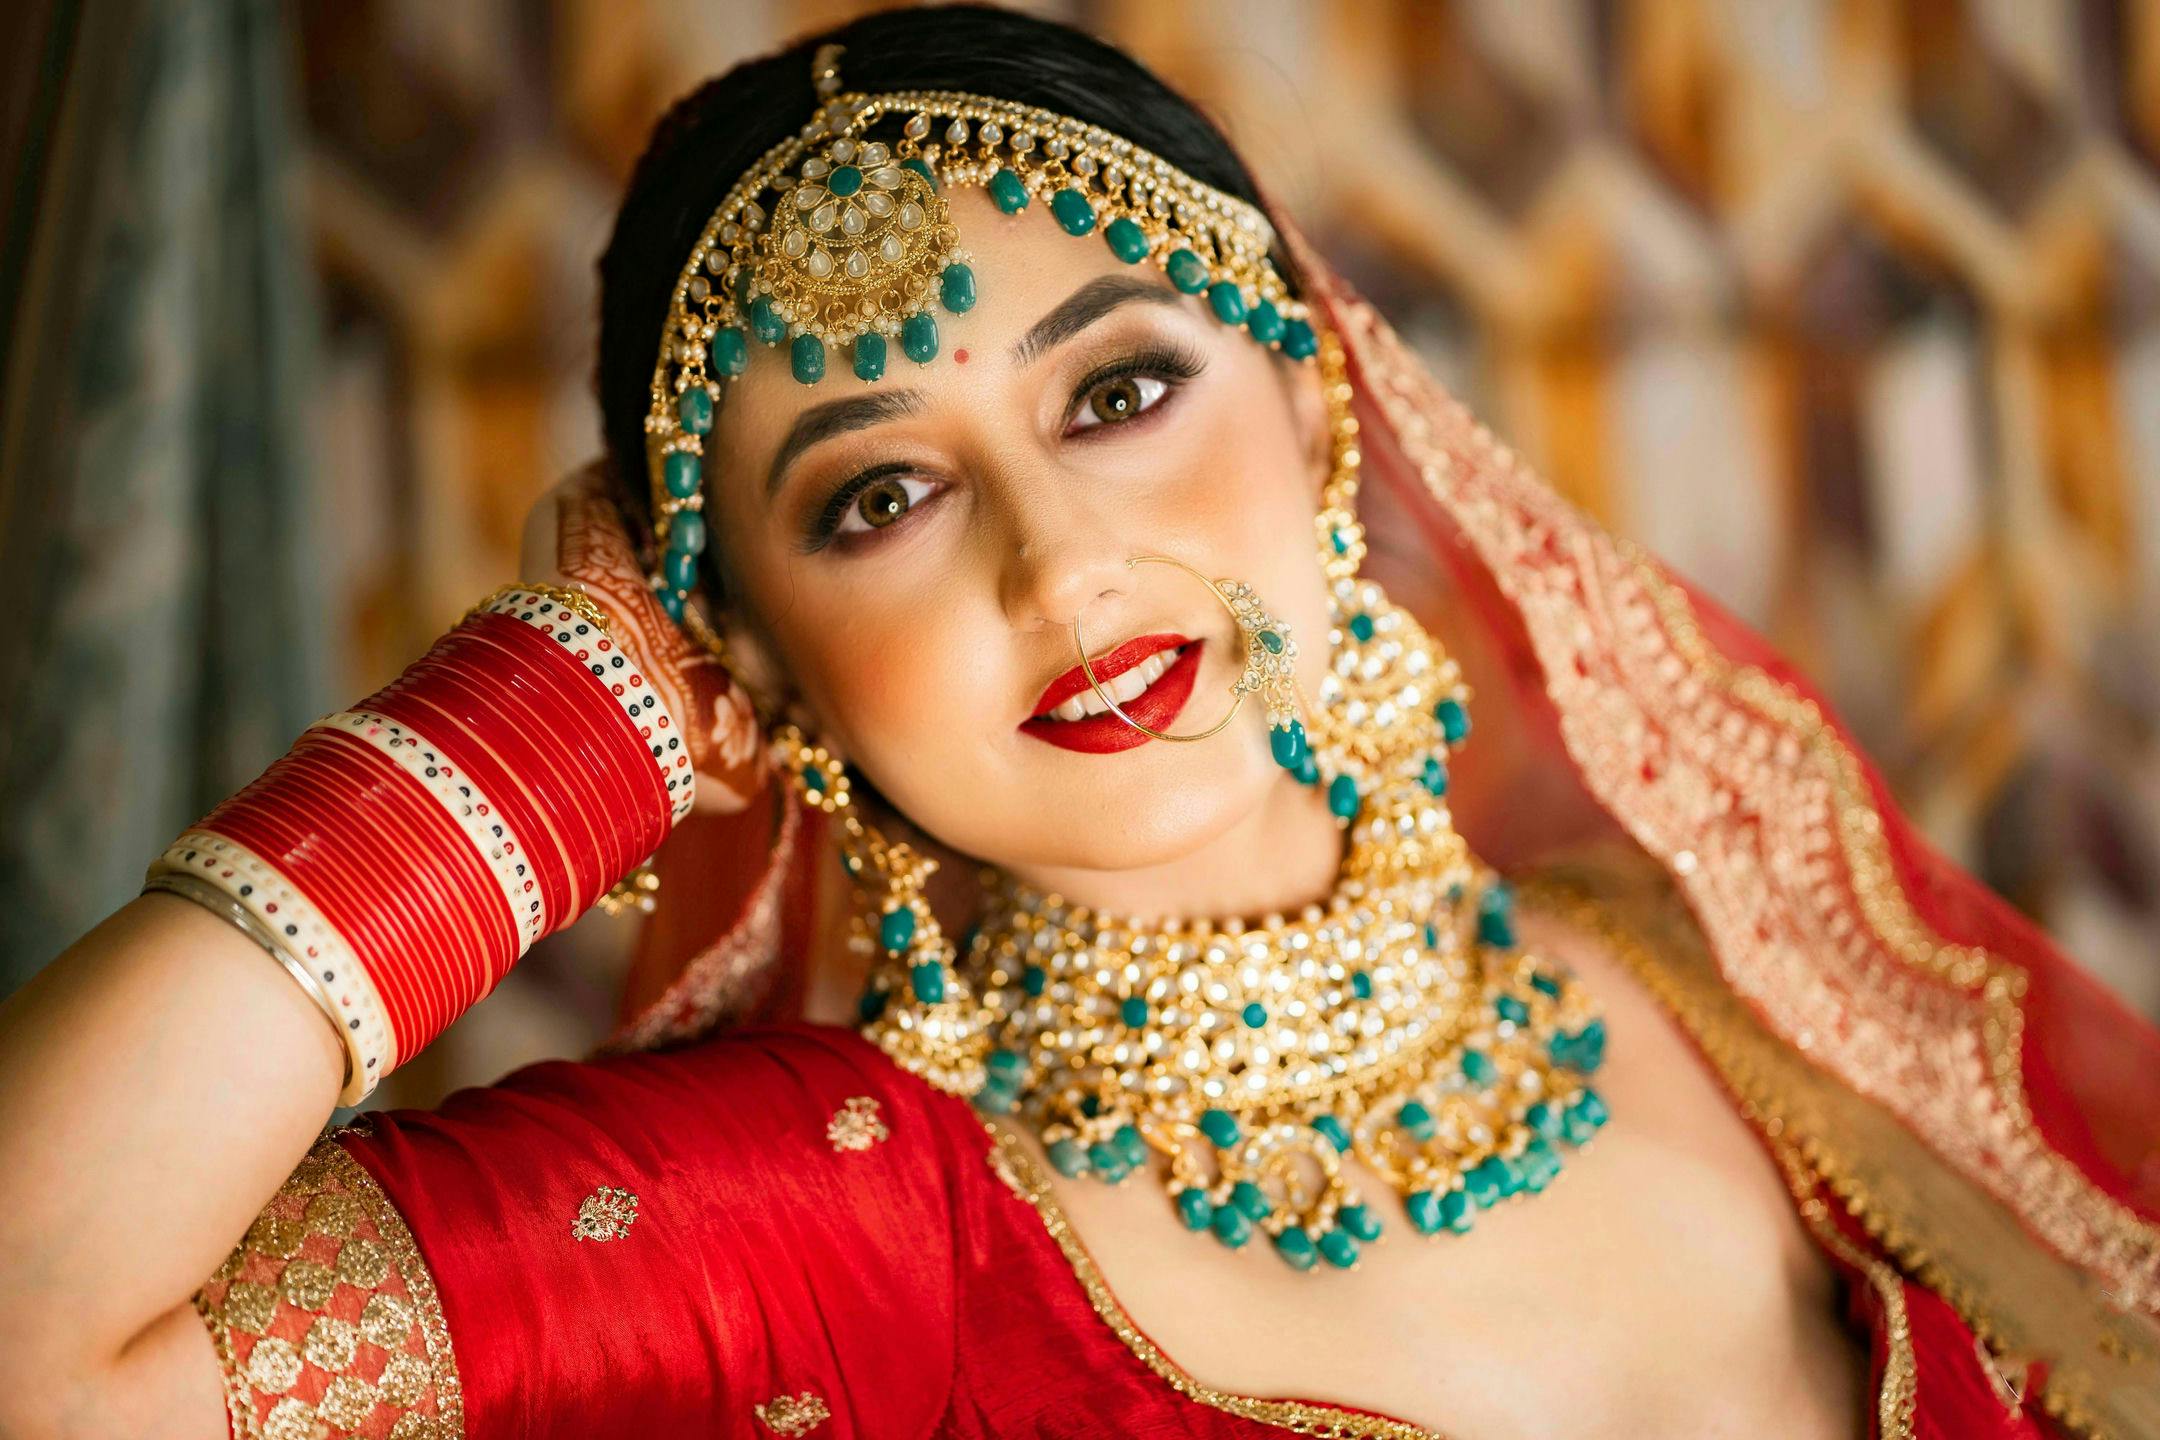 Enhance natural beauty with professional bridal makeup.